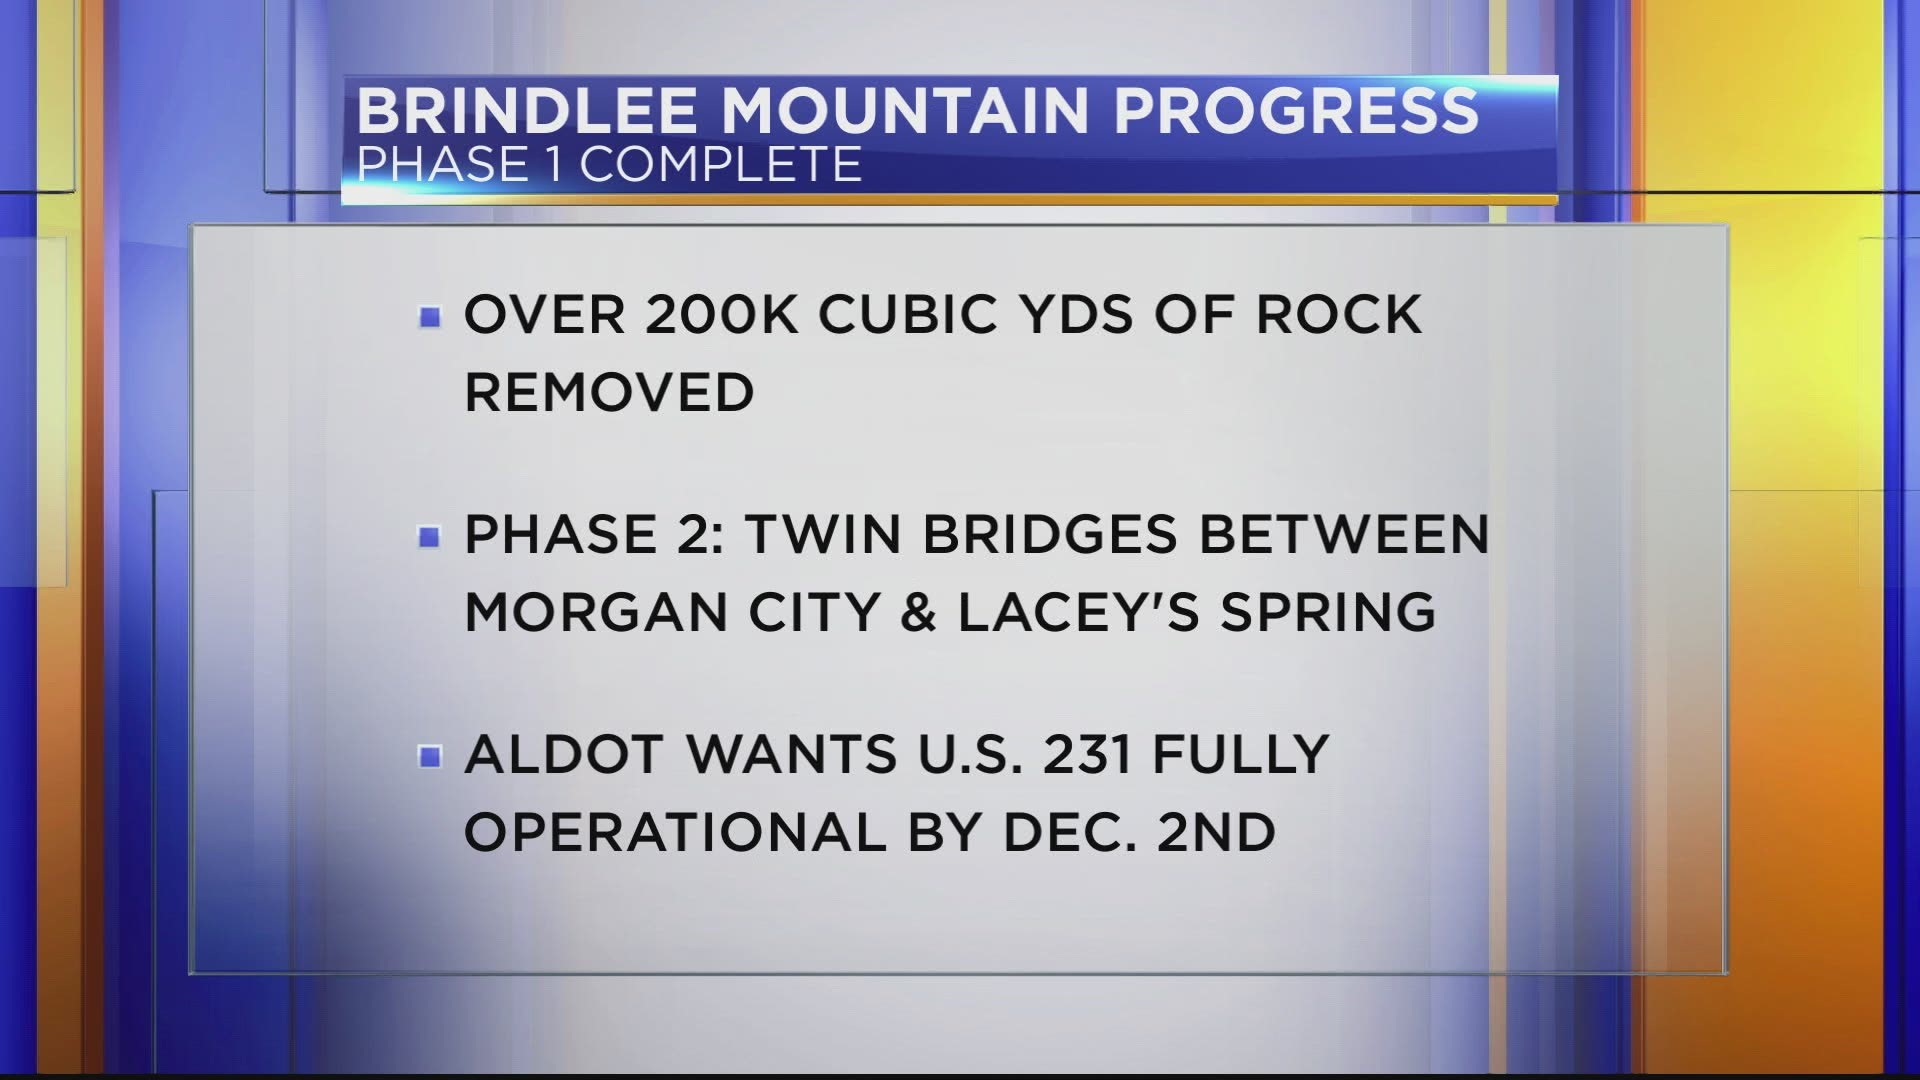 The landslide on Brindlee Mountain in Morgan County caused a lot of damage to U.S. 231, but Phase Ohase one of the repair is now complete.